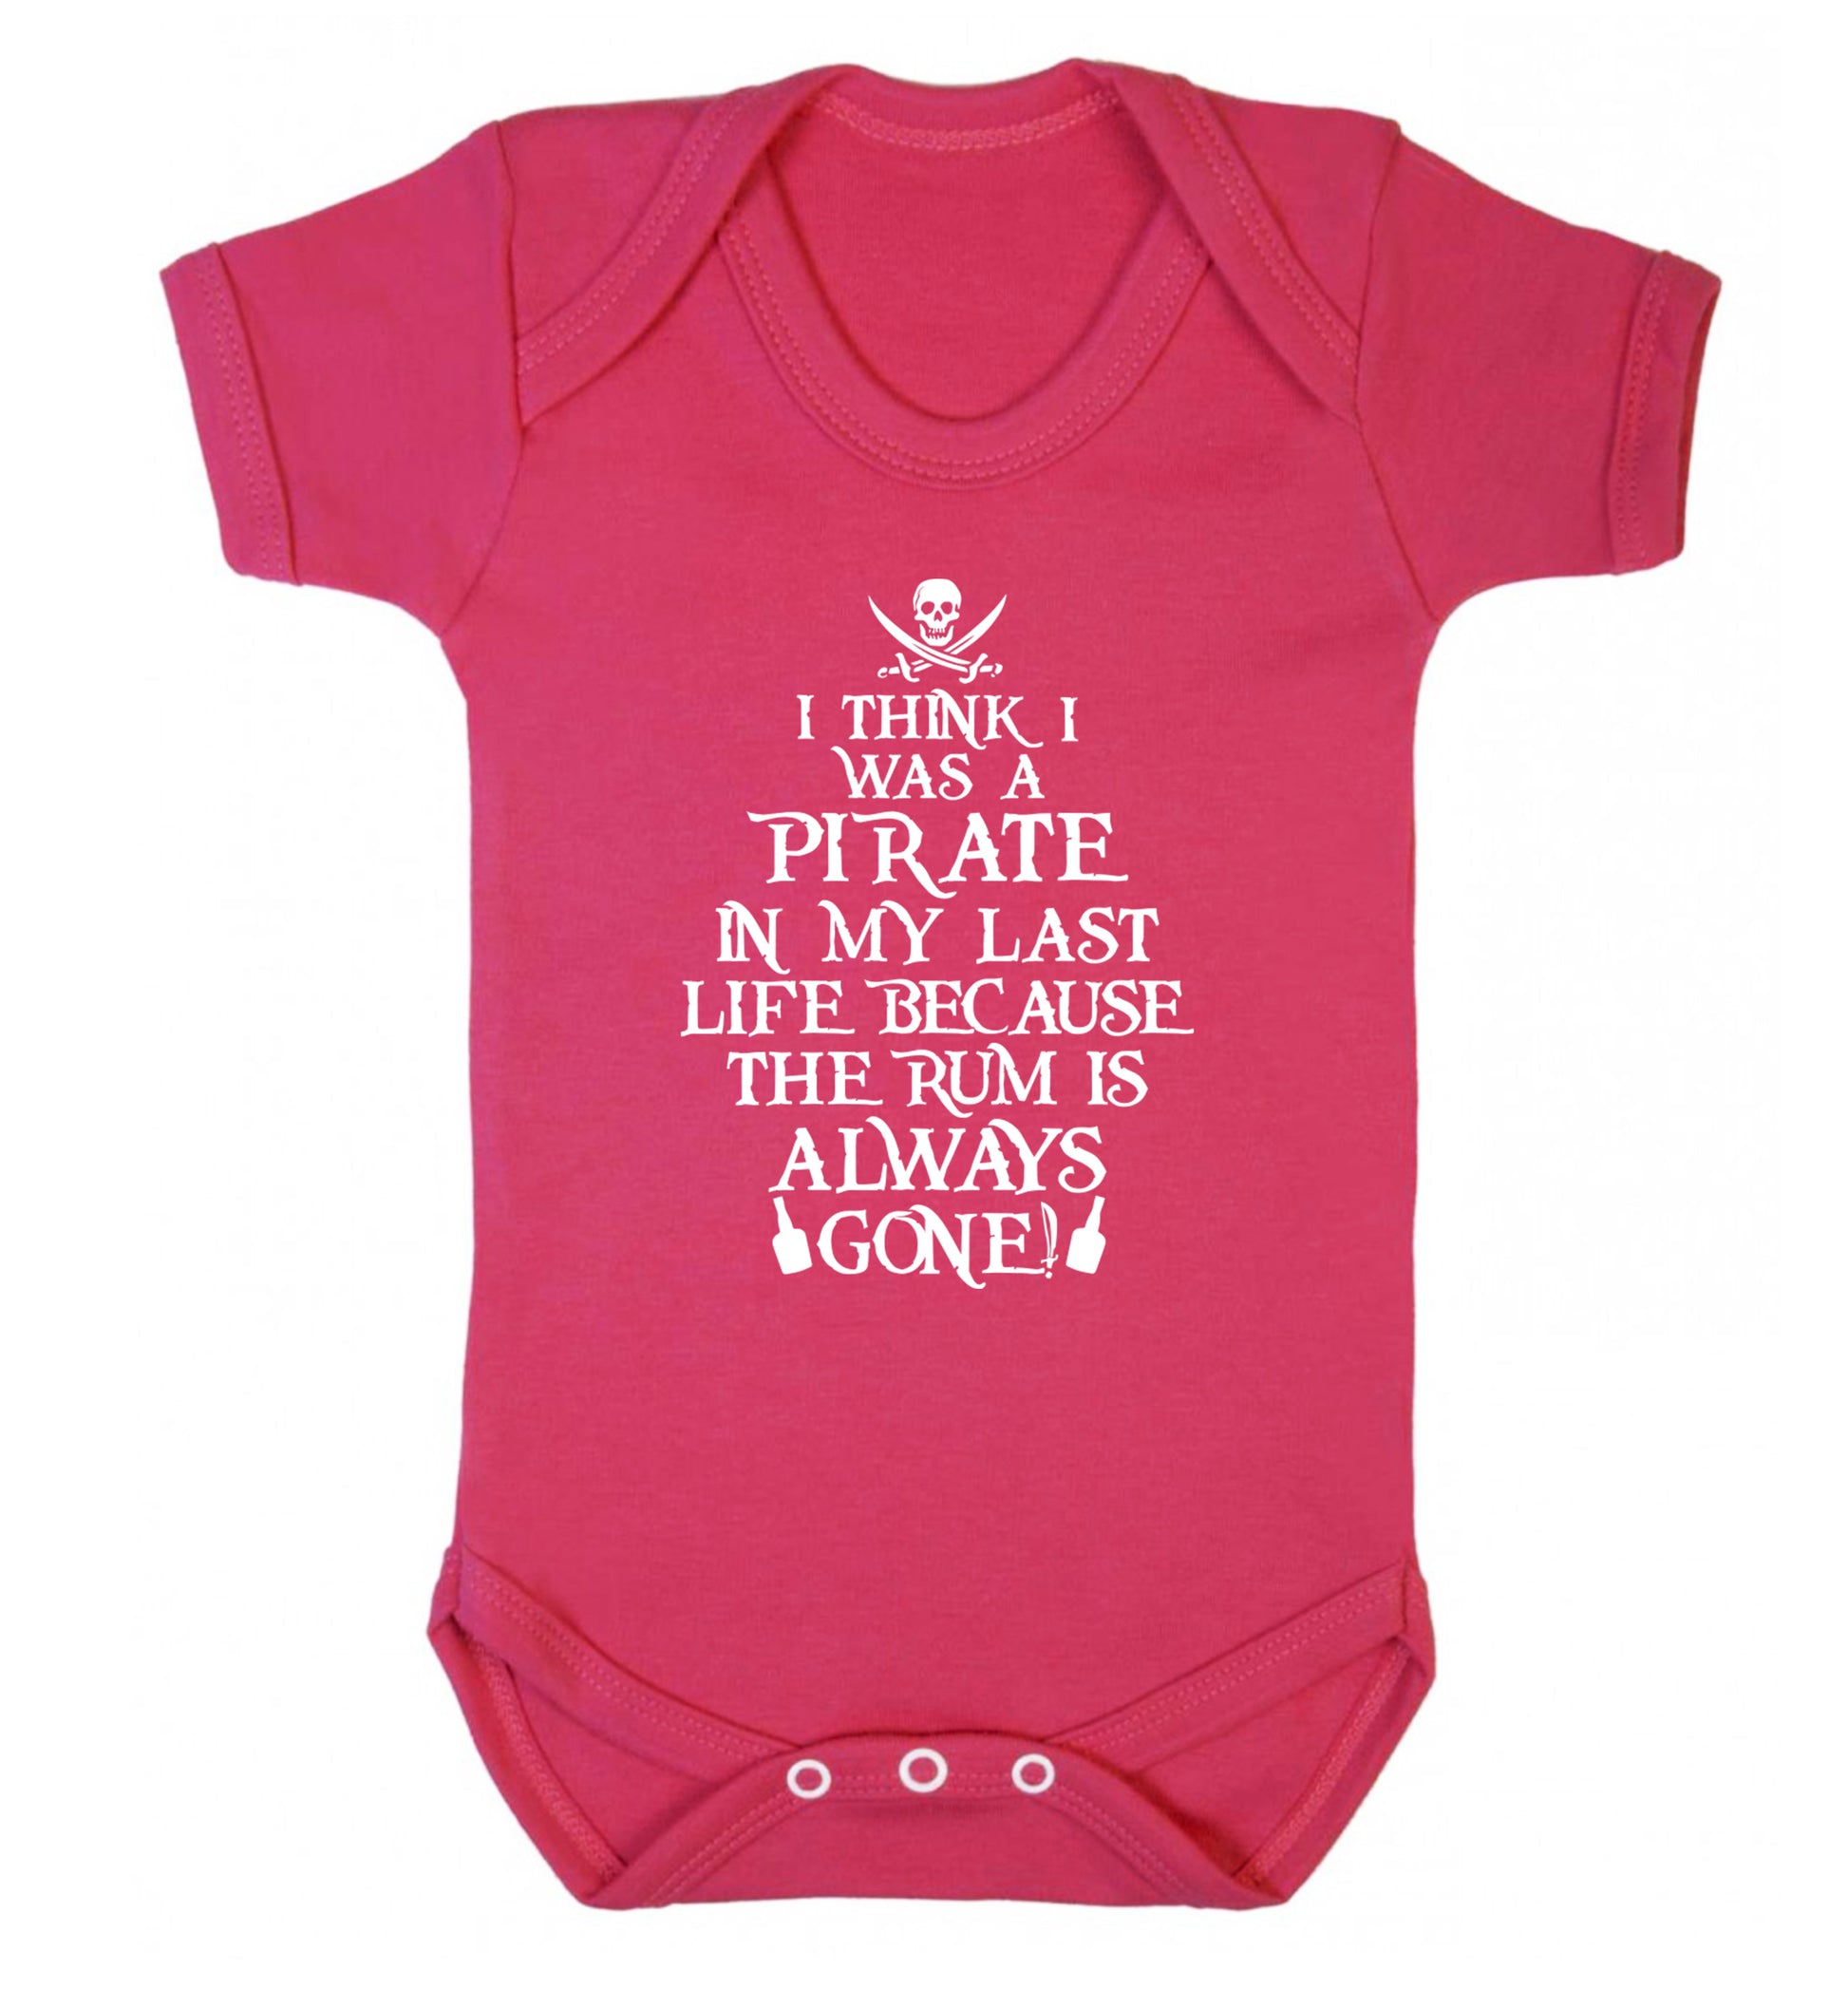 I think I was a pirate in my past life because the rum is always gone! Baby Vest dark pink 18-24 months